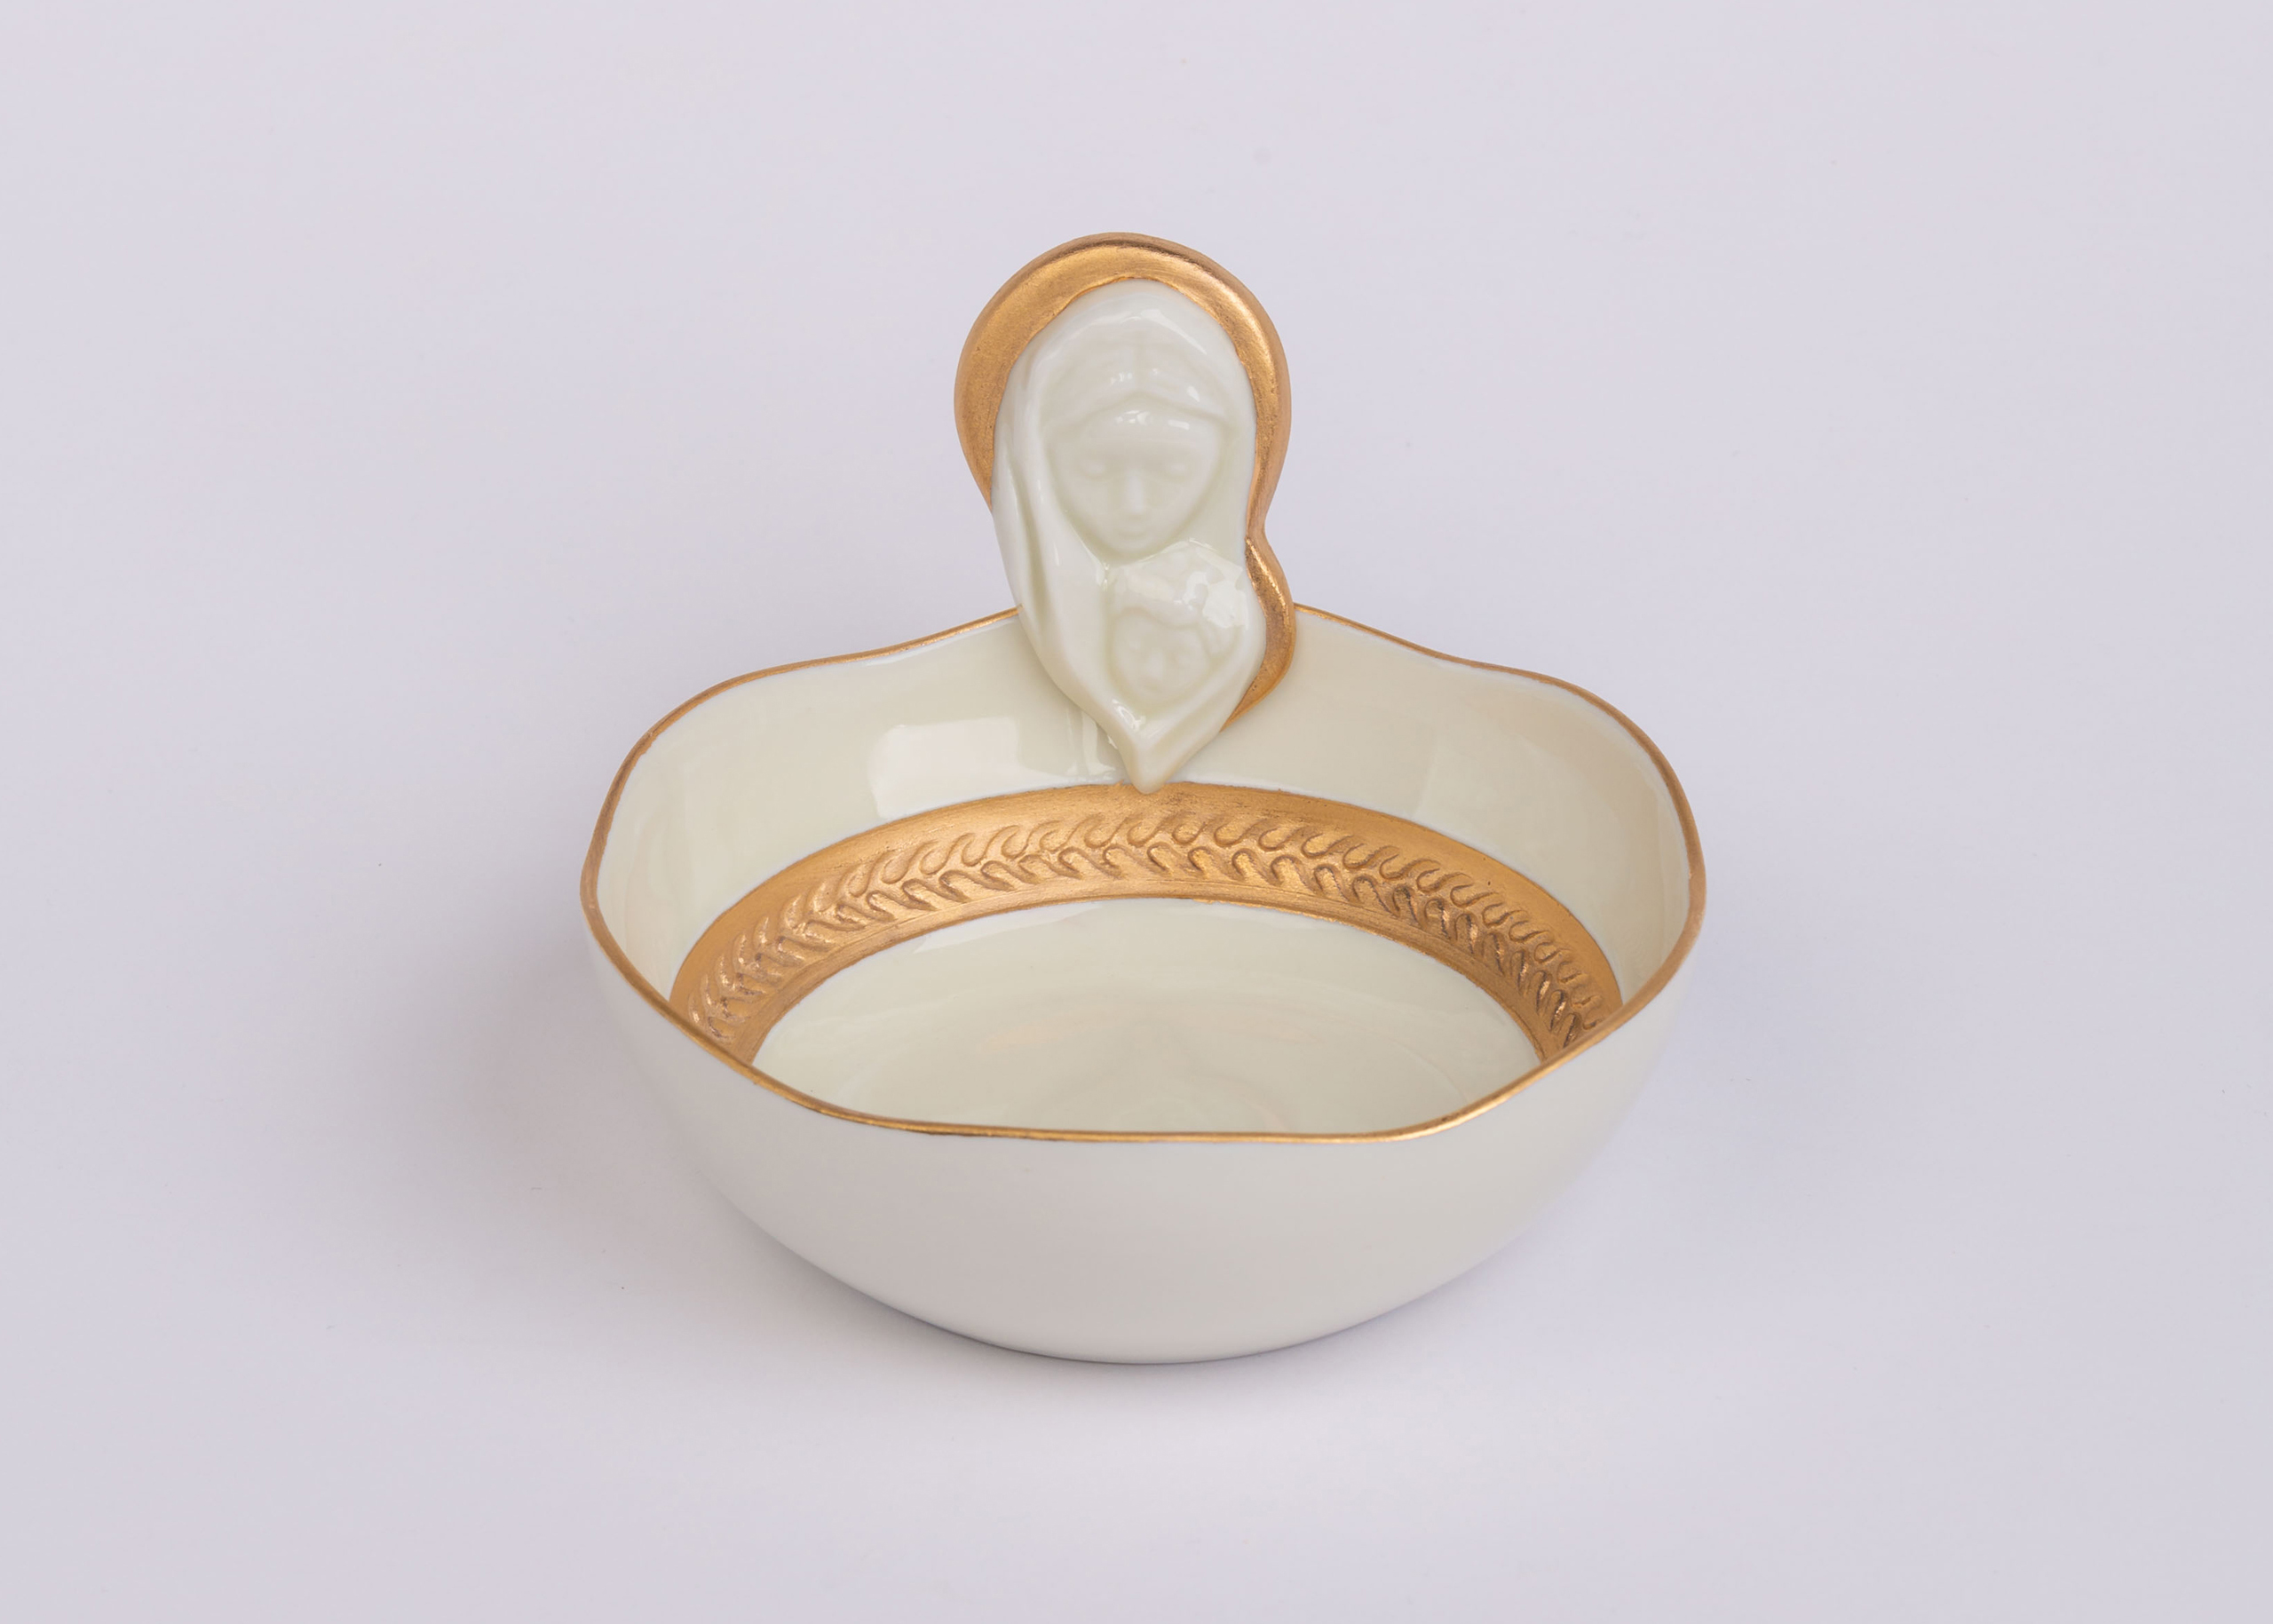 Ave' Maria Bowl in Ivory Porcelain